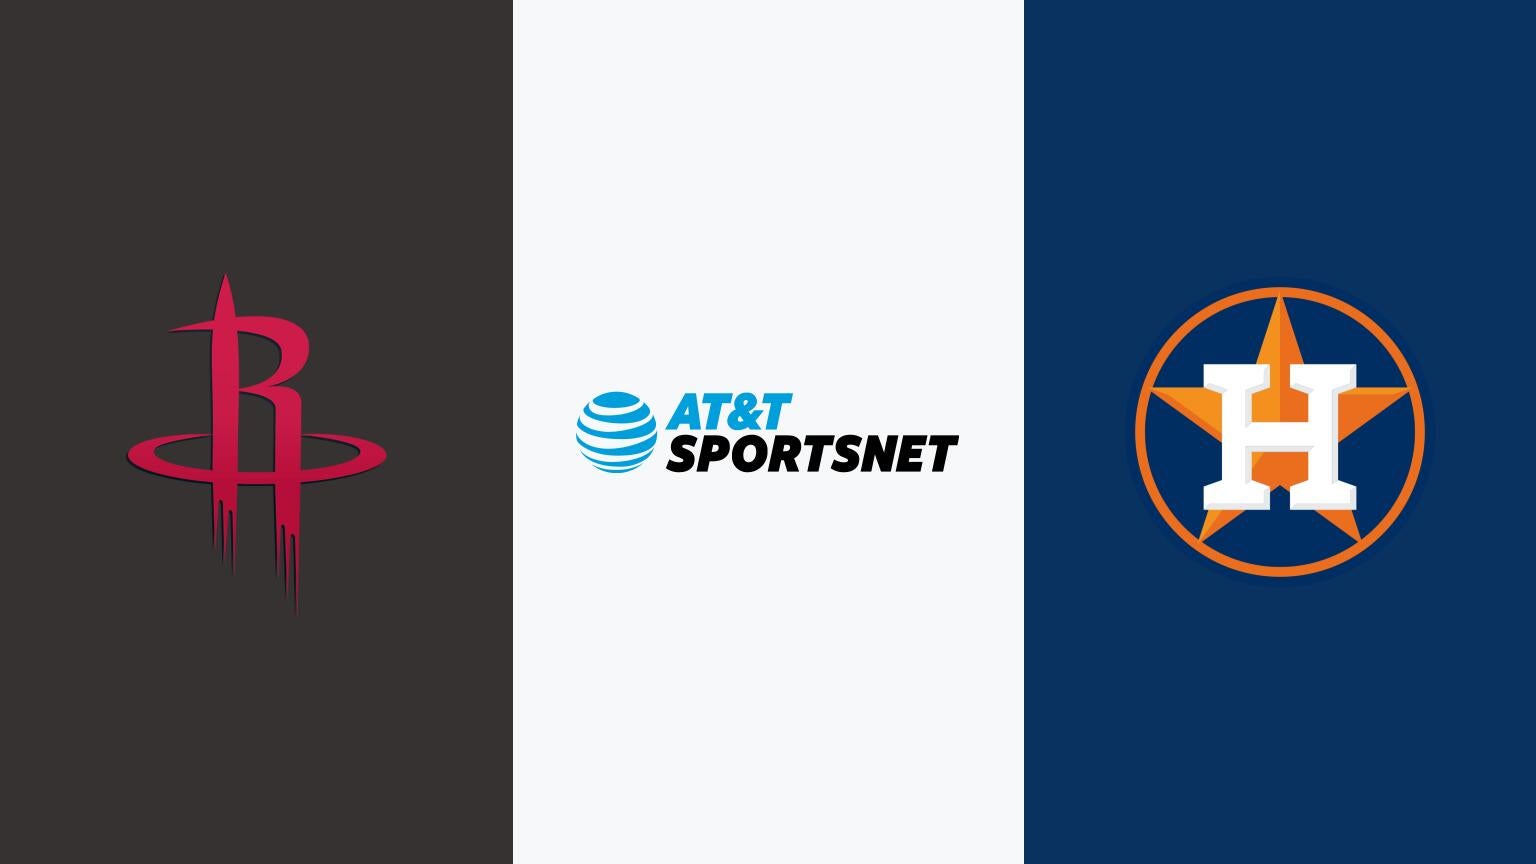 Space City Home Network, which will broadcast Astros and Rockets